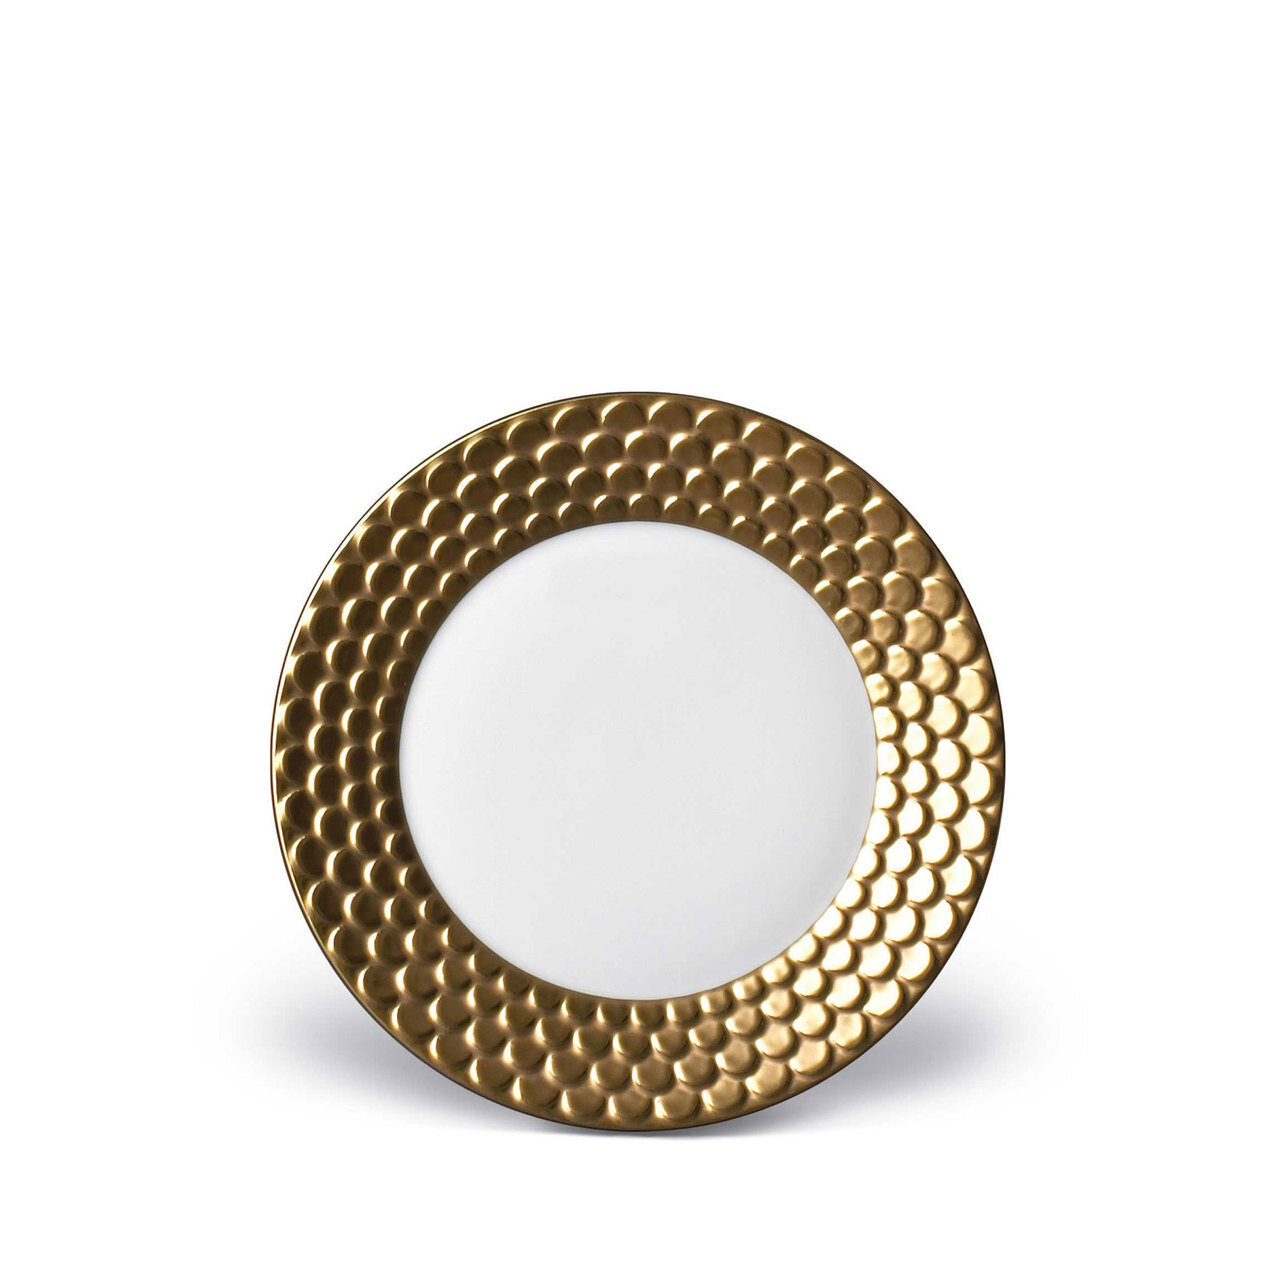 L'Objet Aegean Bread and Butter Plate Gold